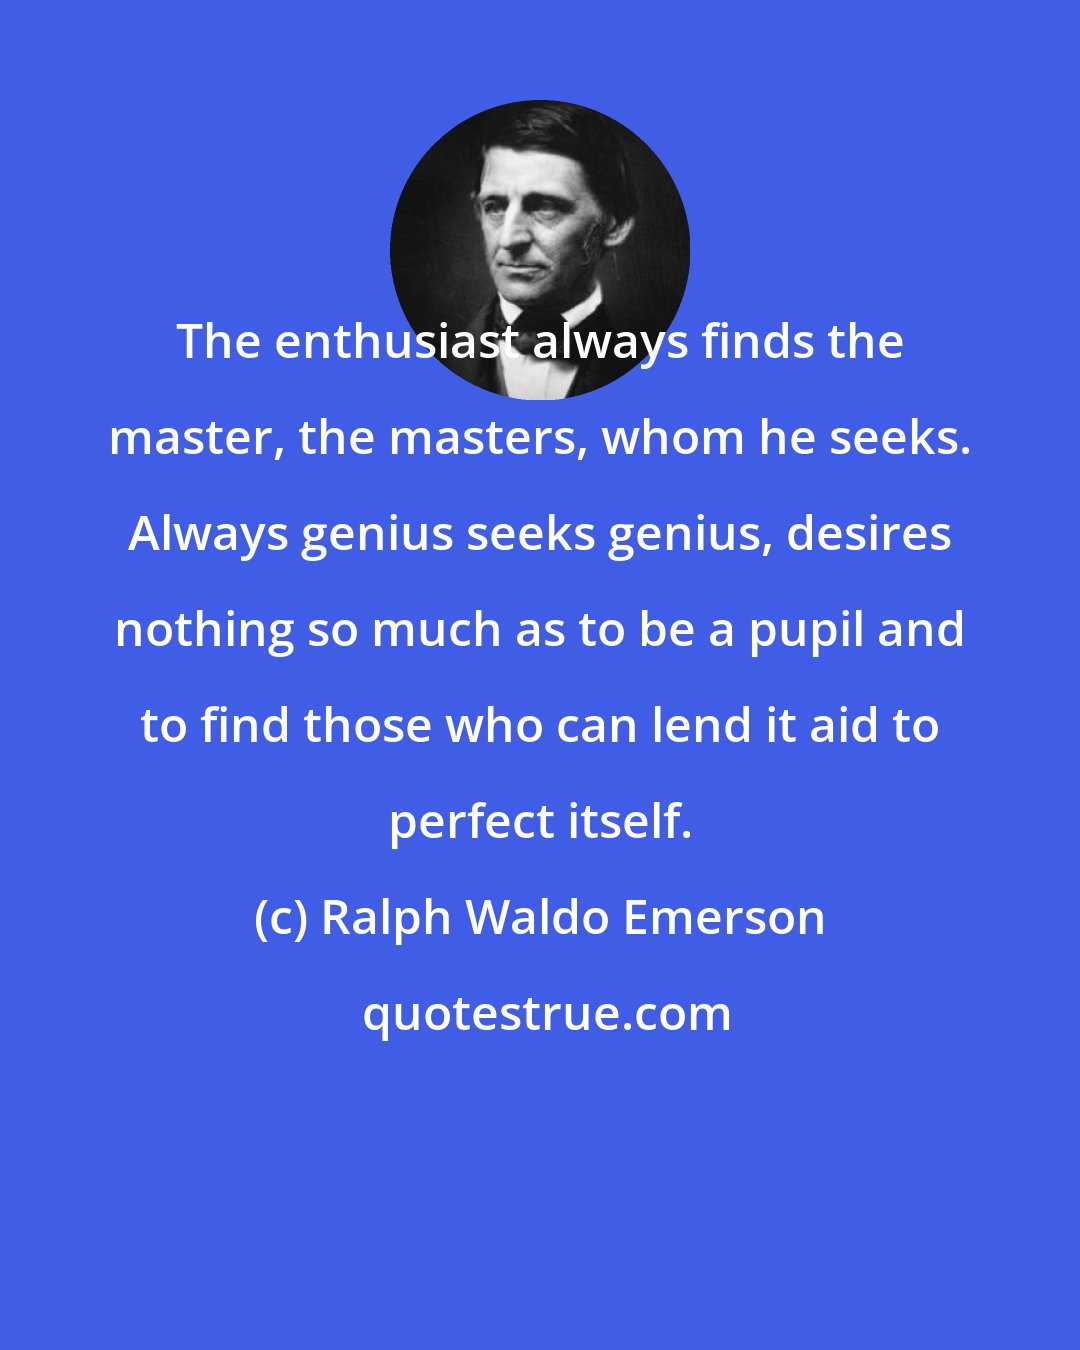 Ralph Waldo Emerson: The enthusiast always finds the master, the masters, whom he seeks. Always genius seeks genius, desires nothing so much as to be a pupil and to find those who can lend it aid to perfect itself.